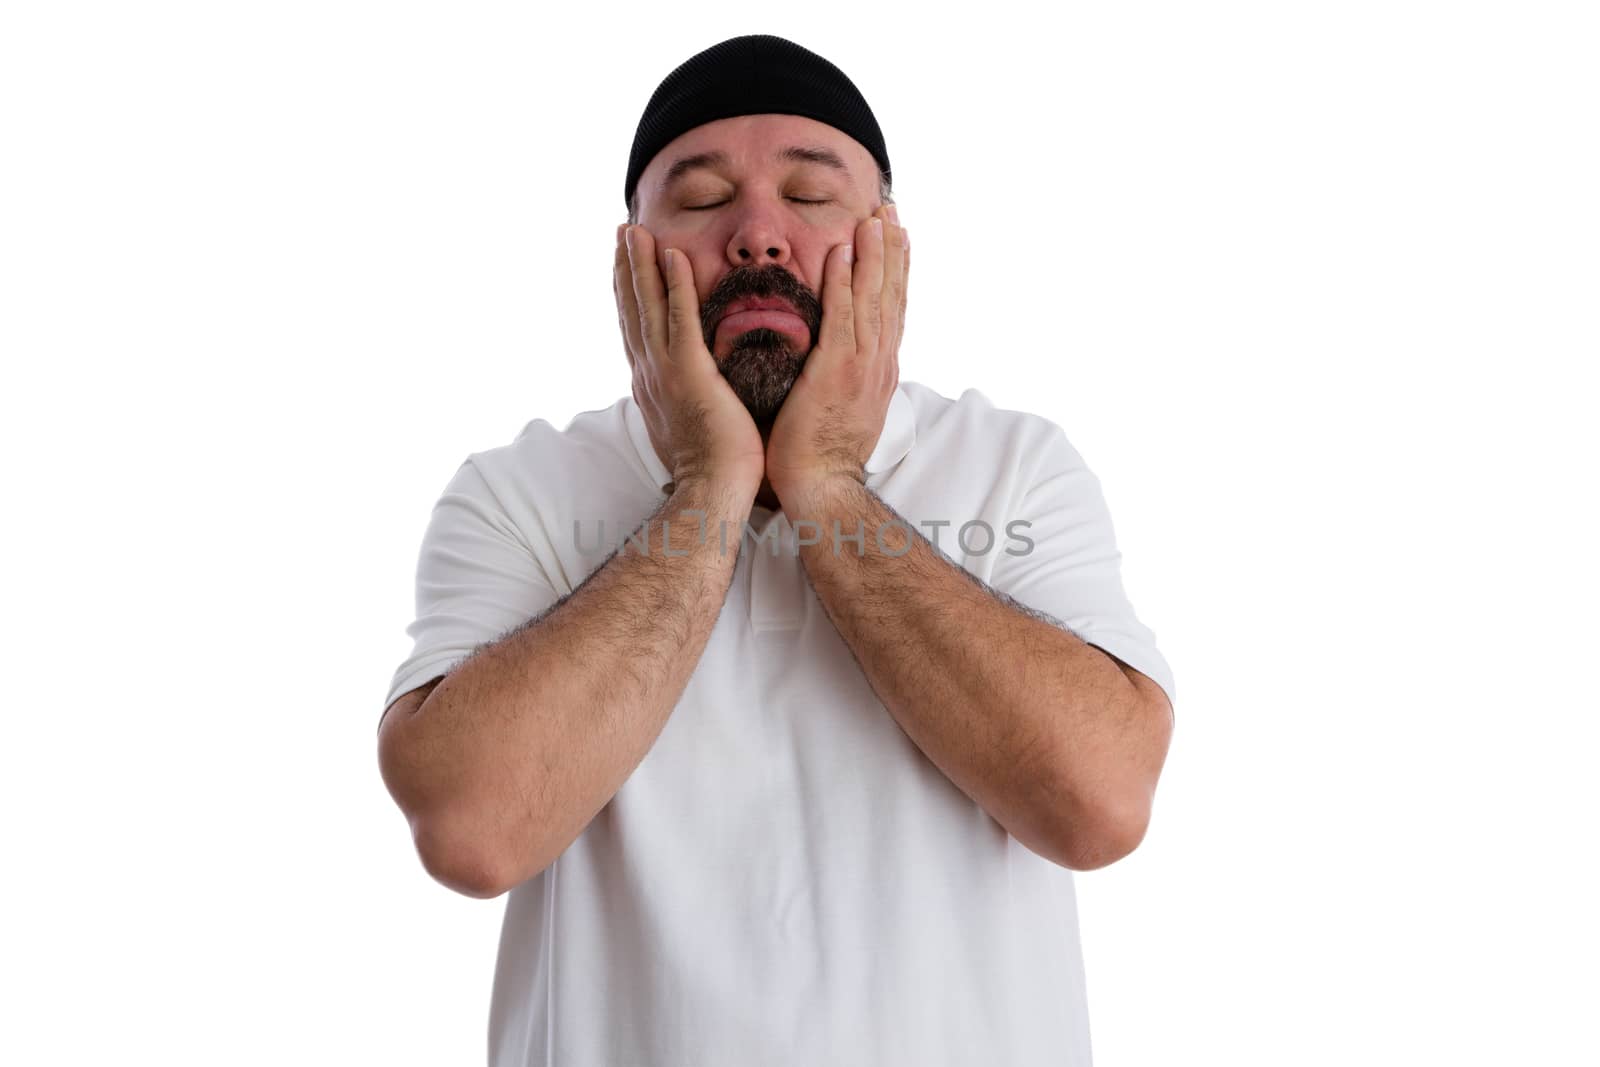 Sinful man seeking absolution praying to God with his hands to his cheeks, eyes closed and a devout expression as he seeks forgiveness, isolated on white